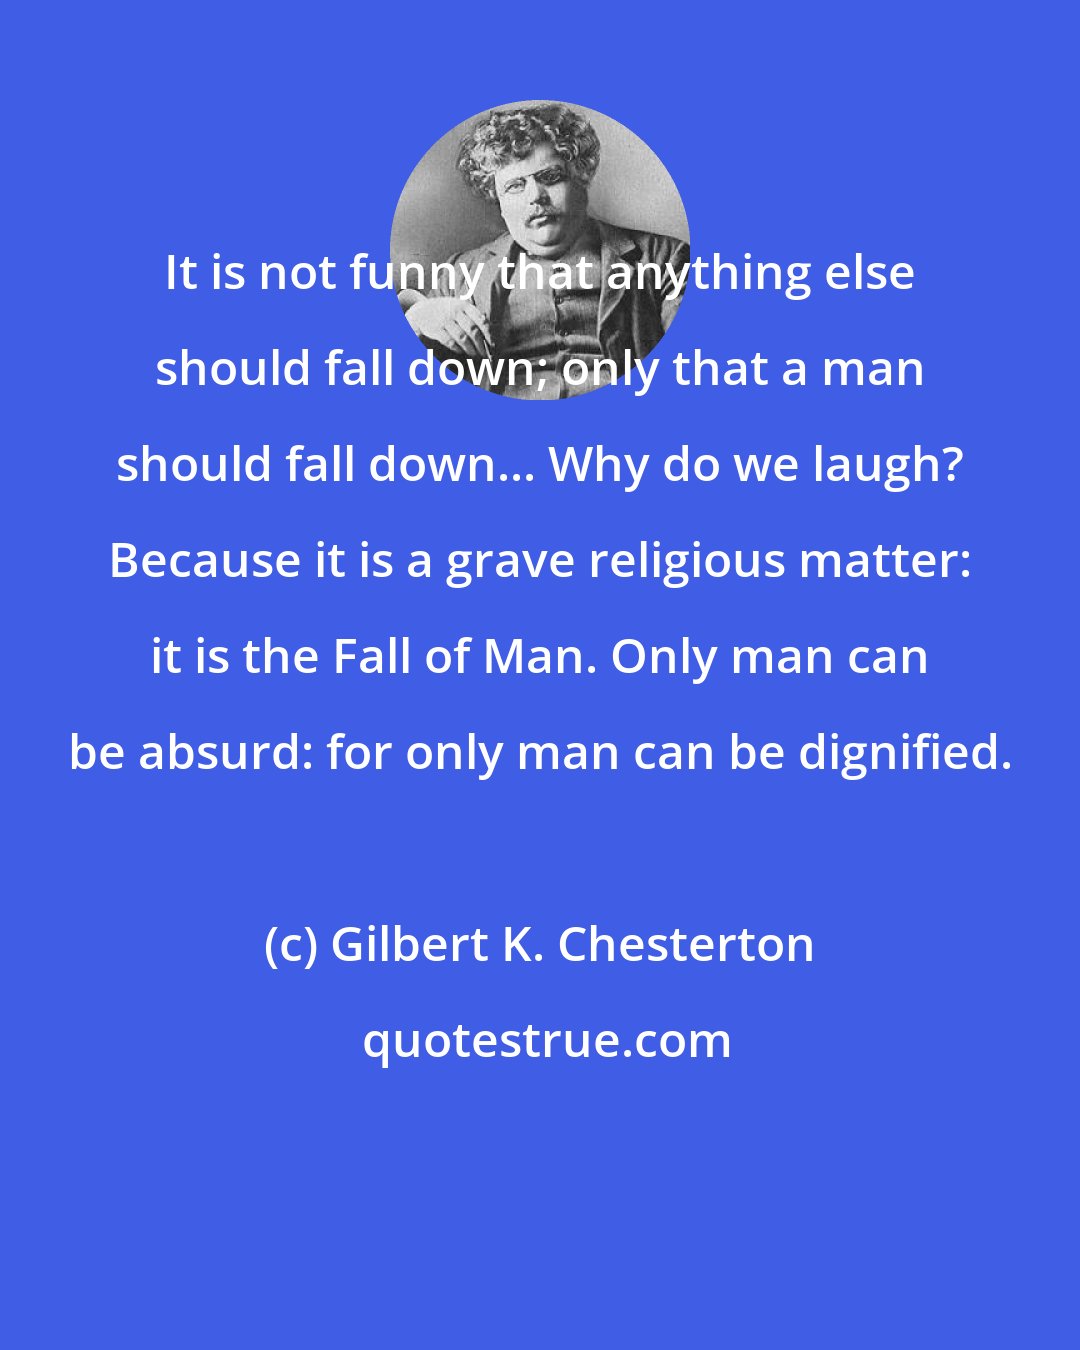 Gilbert K. Chesterton: It is not funny that anything else should fall down; only that a man should fall down... Why do we laugh? Because it is a grave religious matter: it is the Fall of Man. Only man can be absurd: for only man can be dignified.